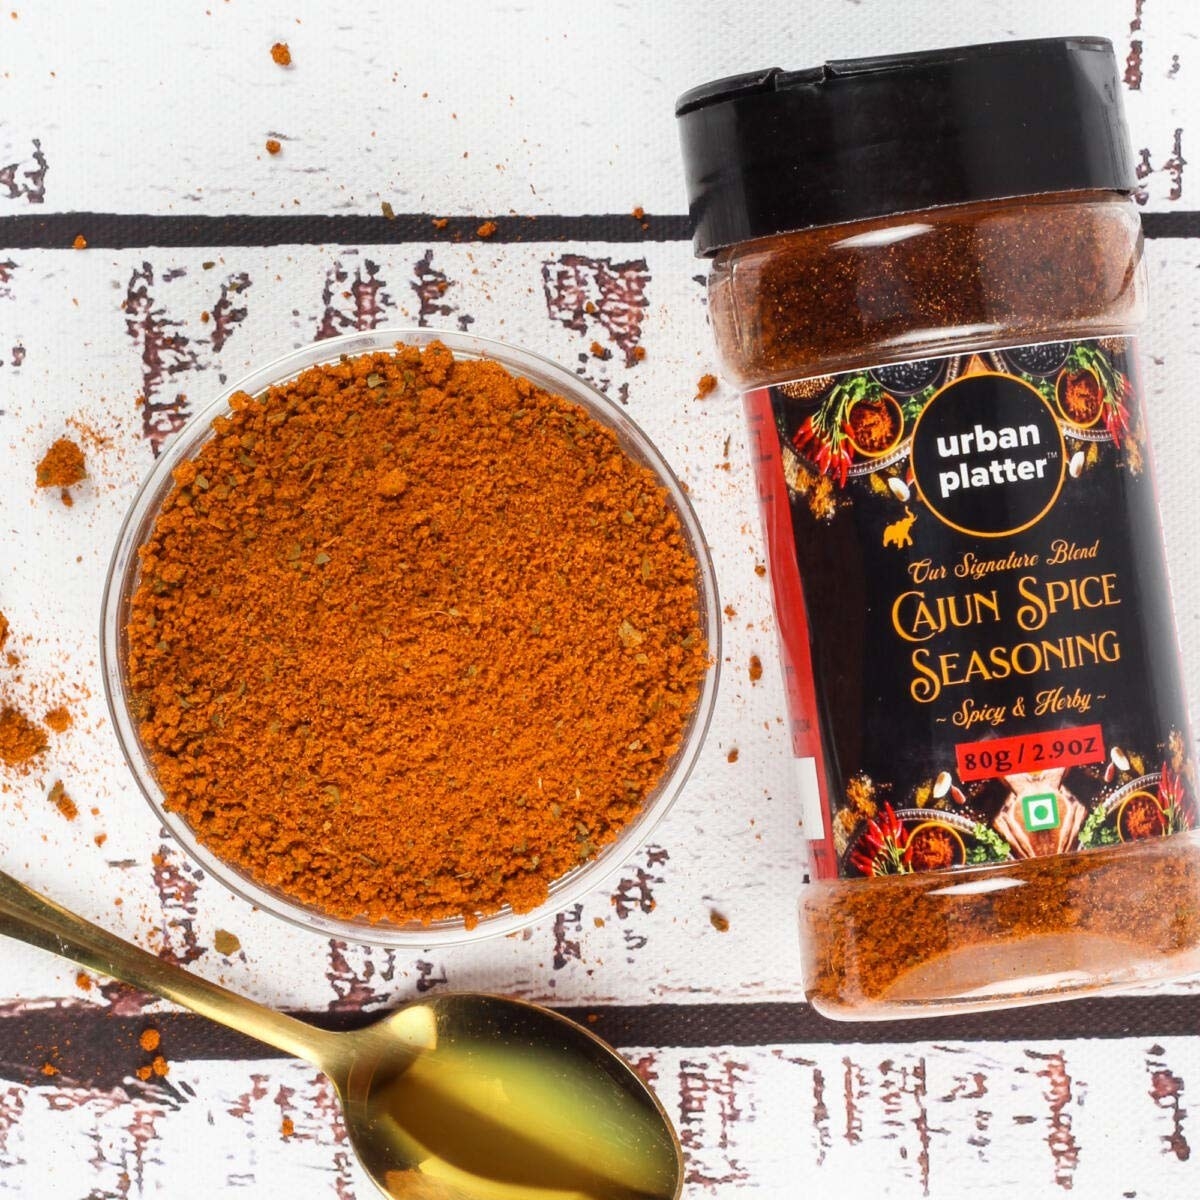 Packaging of the cajun spice seasoning next to the seasoning in a bowl and a spoon